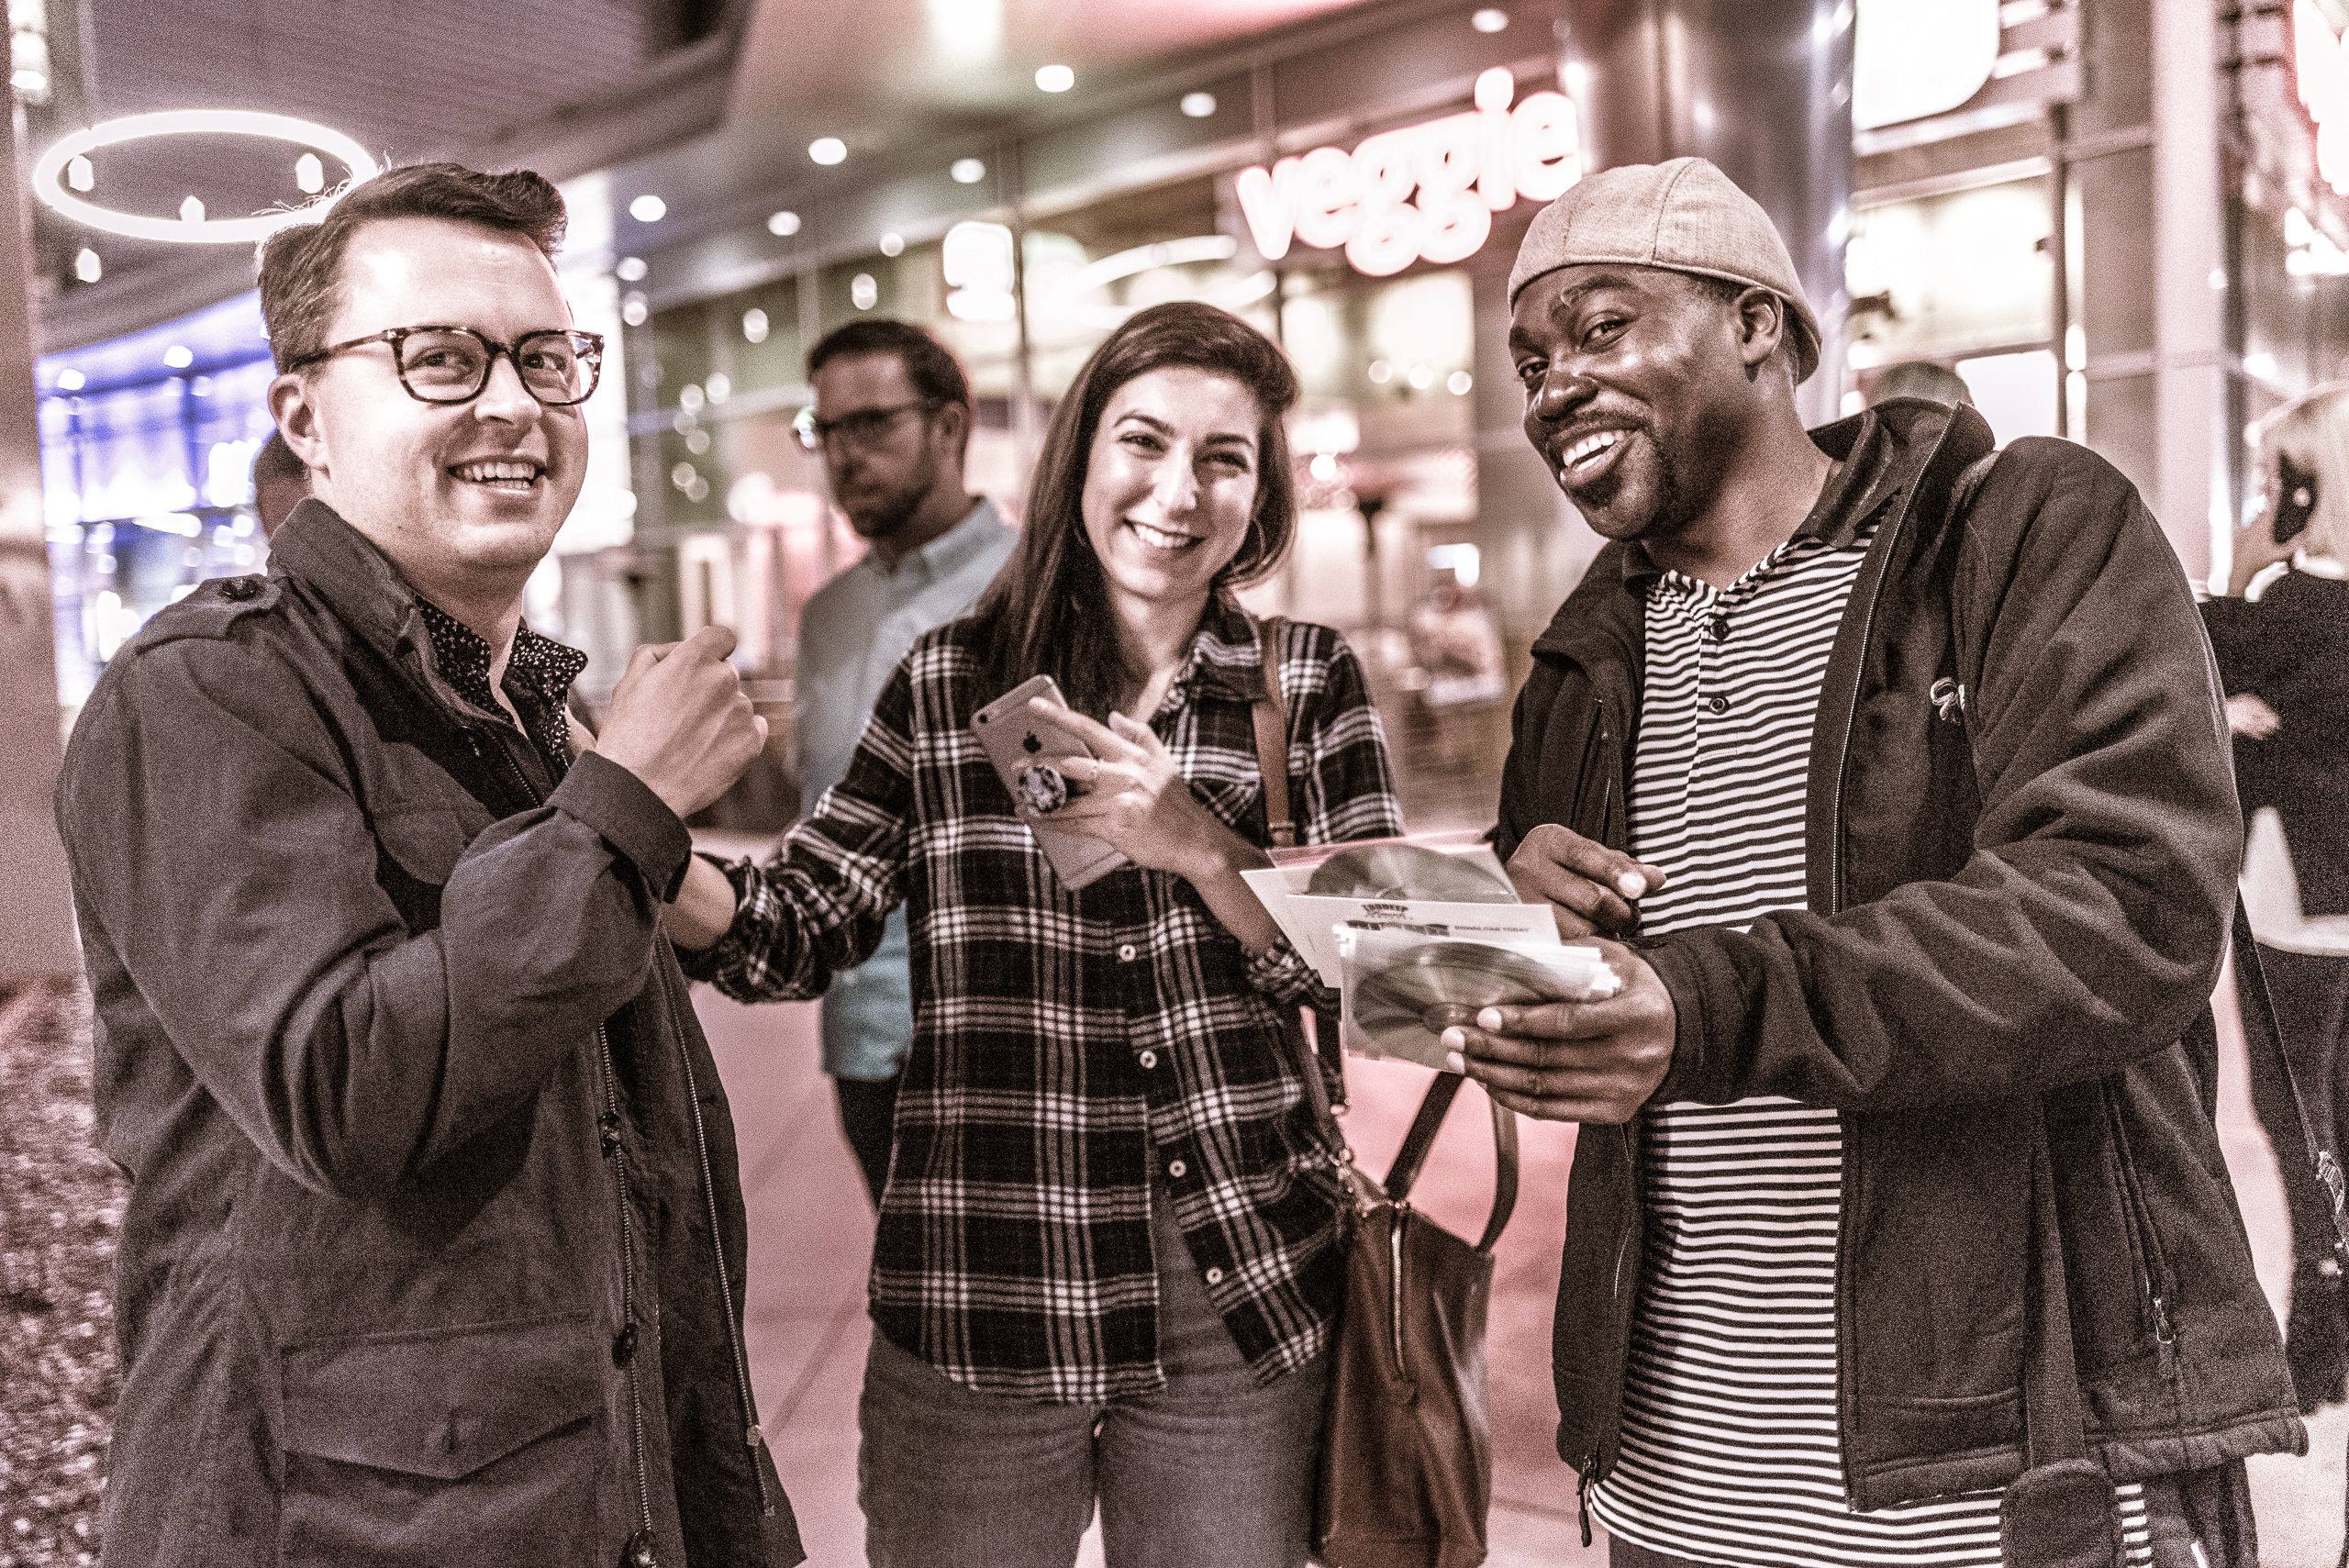 a musician tries to sell one of his CDs to a couple passing through the Arclight Cinema Courtyard on Sunset Blvd in Hollywood